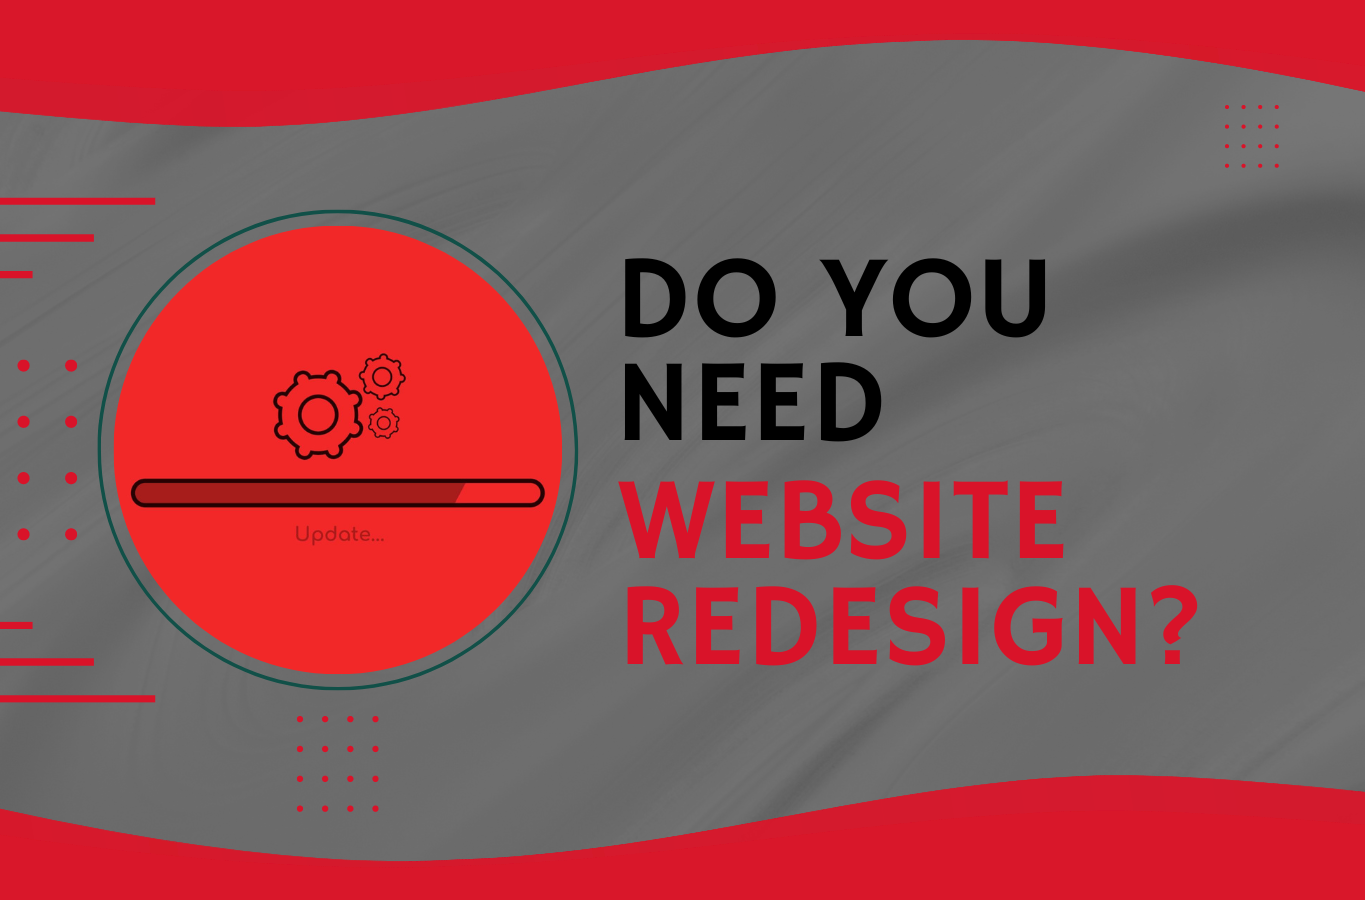 Do you need a site redesign?